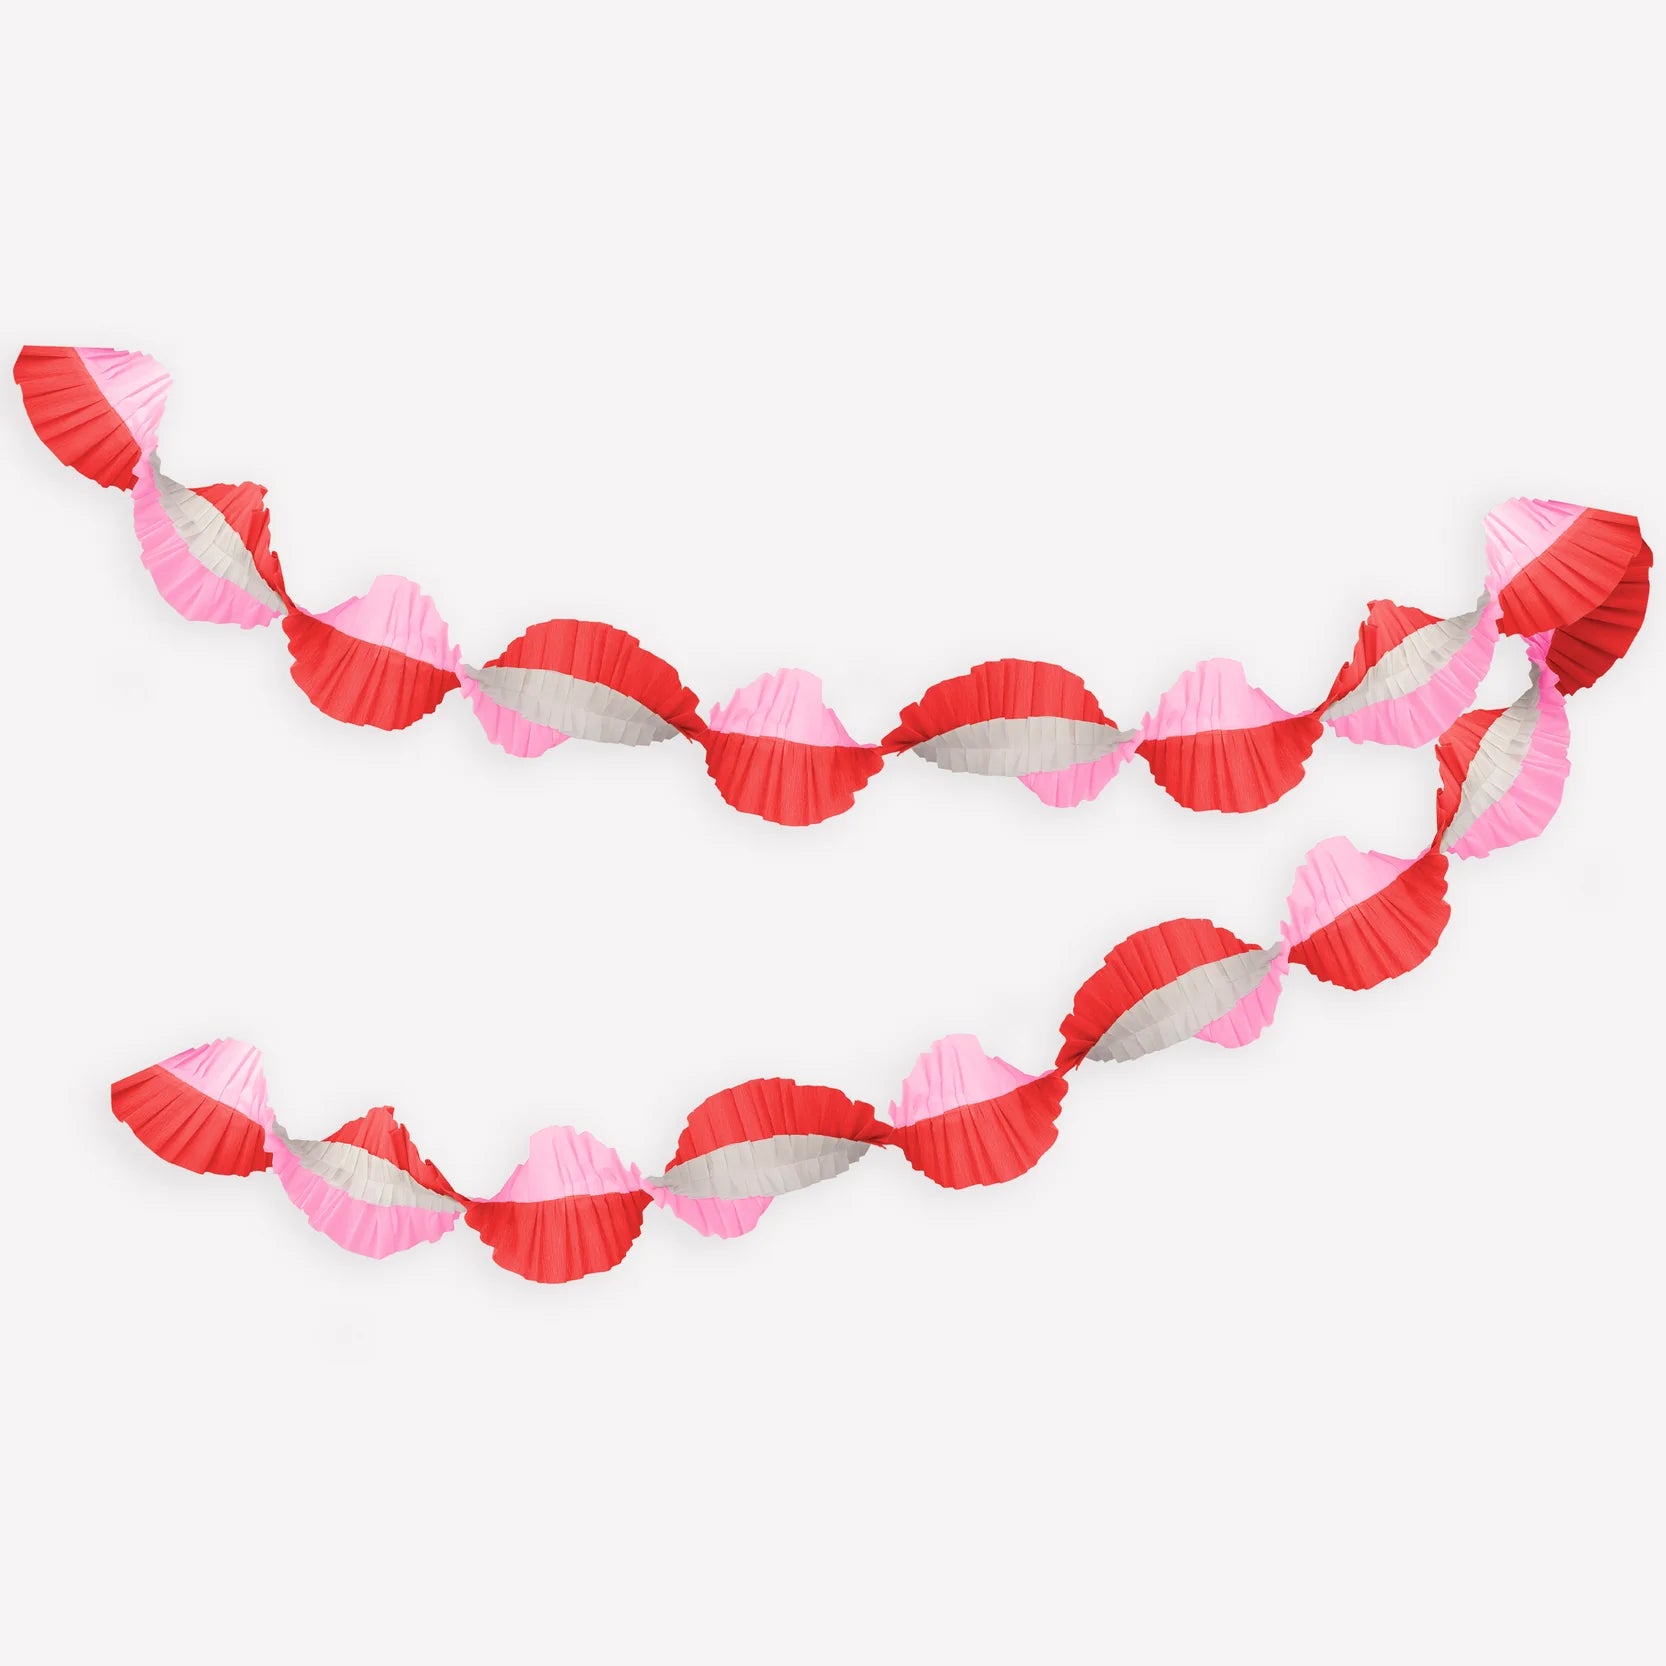 RED AND PINK STITCHED STREAMER